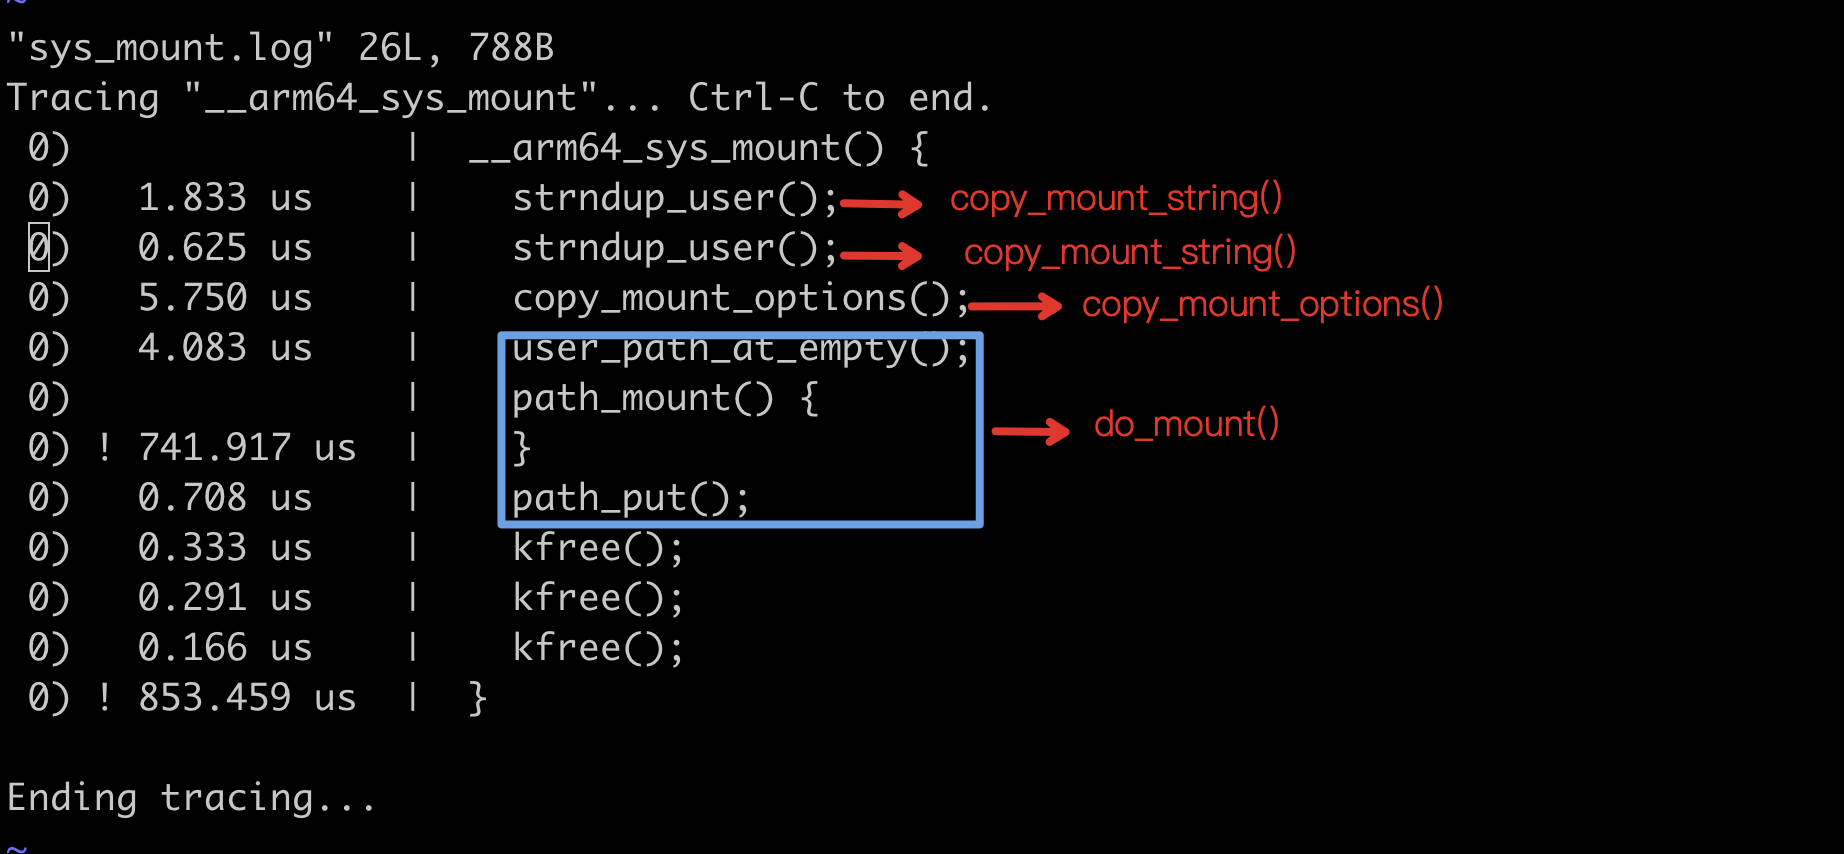 funcgraph_sys_mount_anno.png